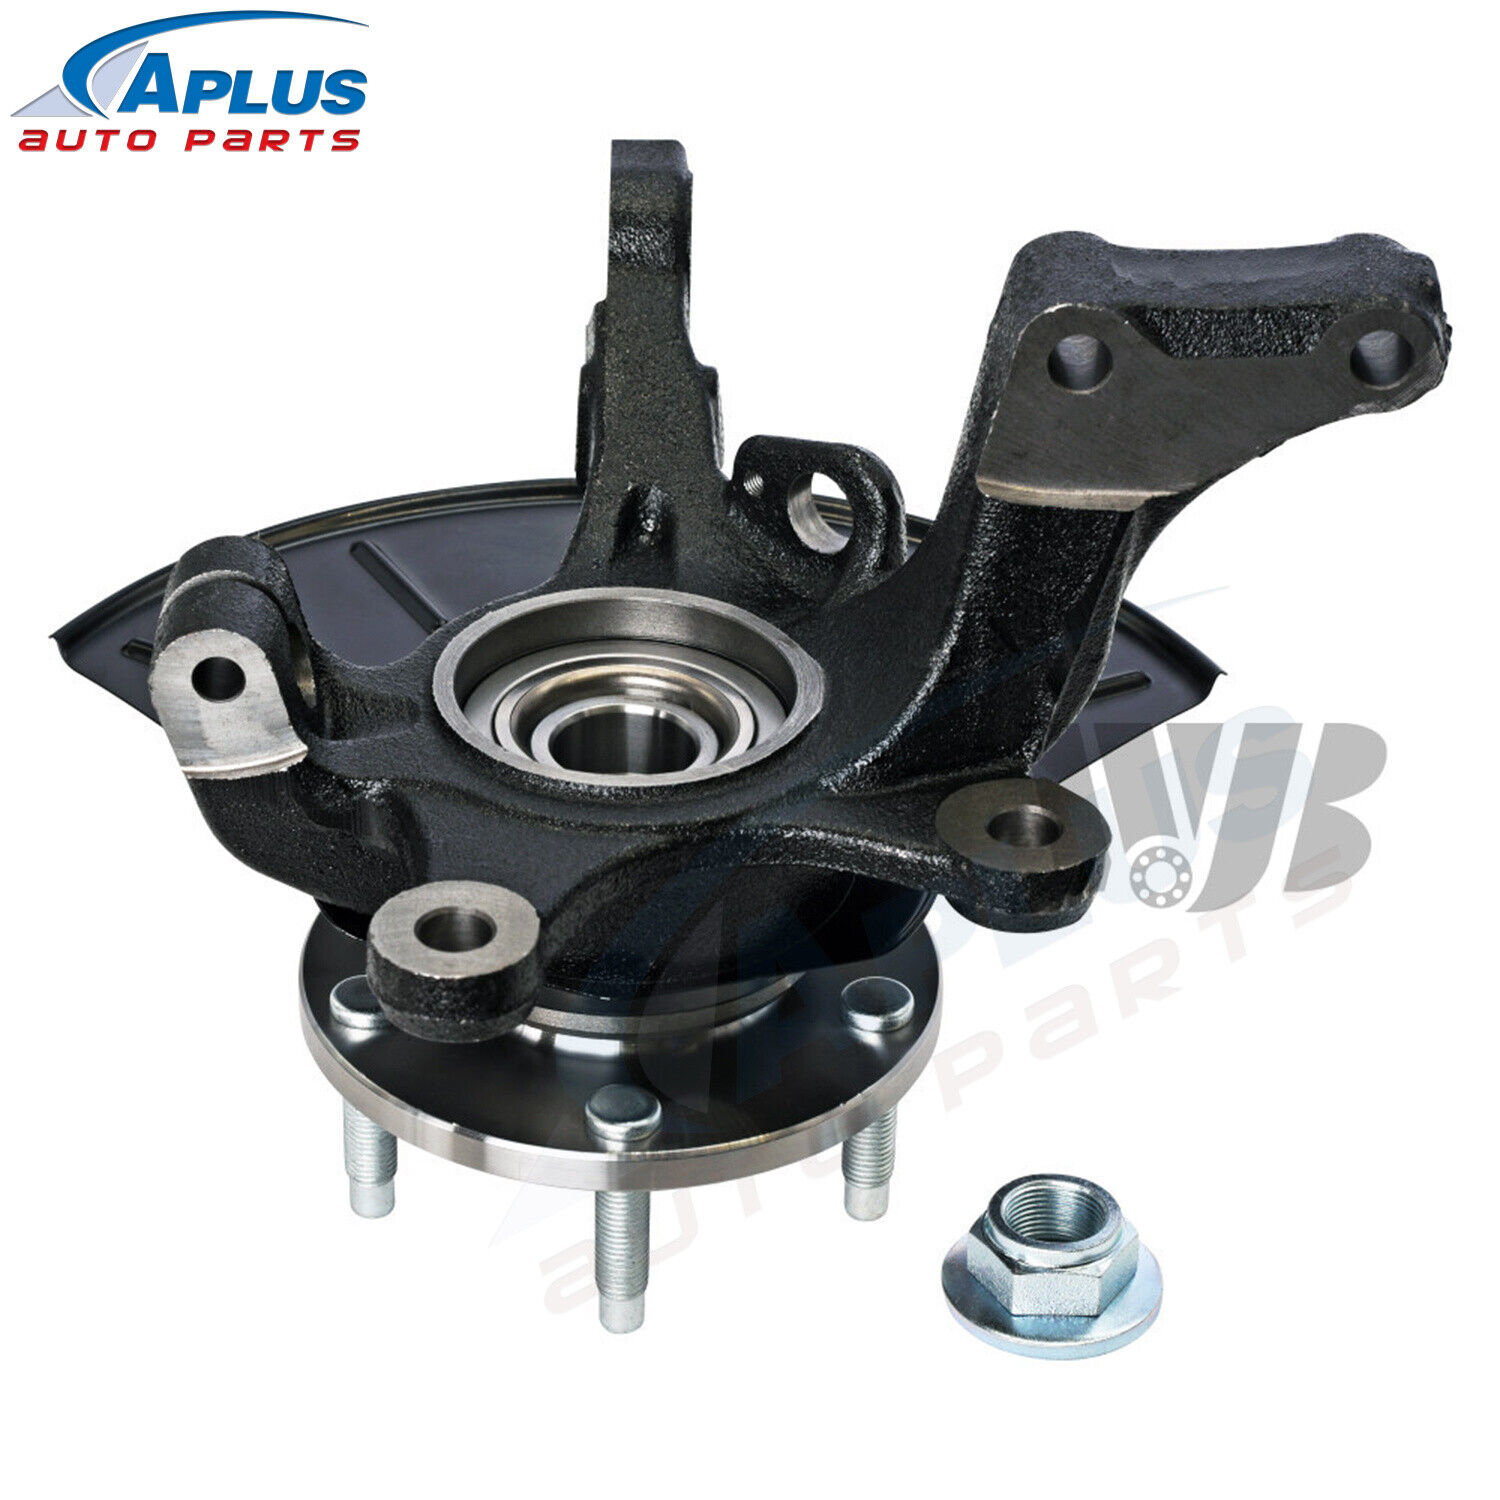 Front LH Wheel Bearing Hub Knuckle Assembly for 01-11 Ford Escape Mazda Tribute